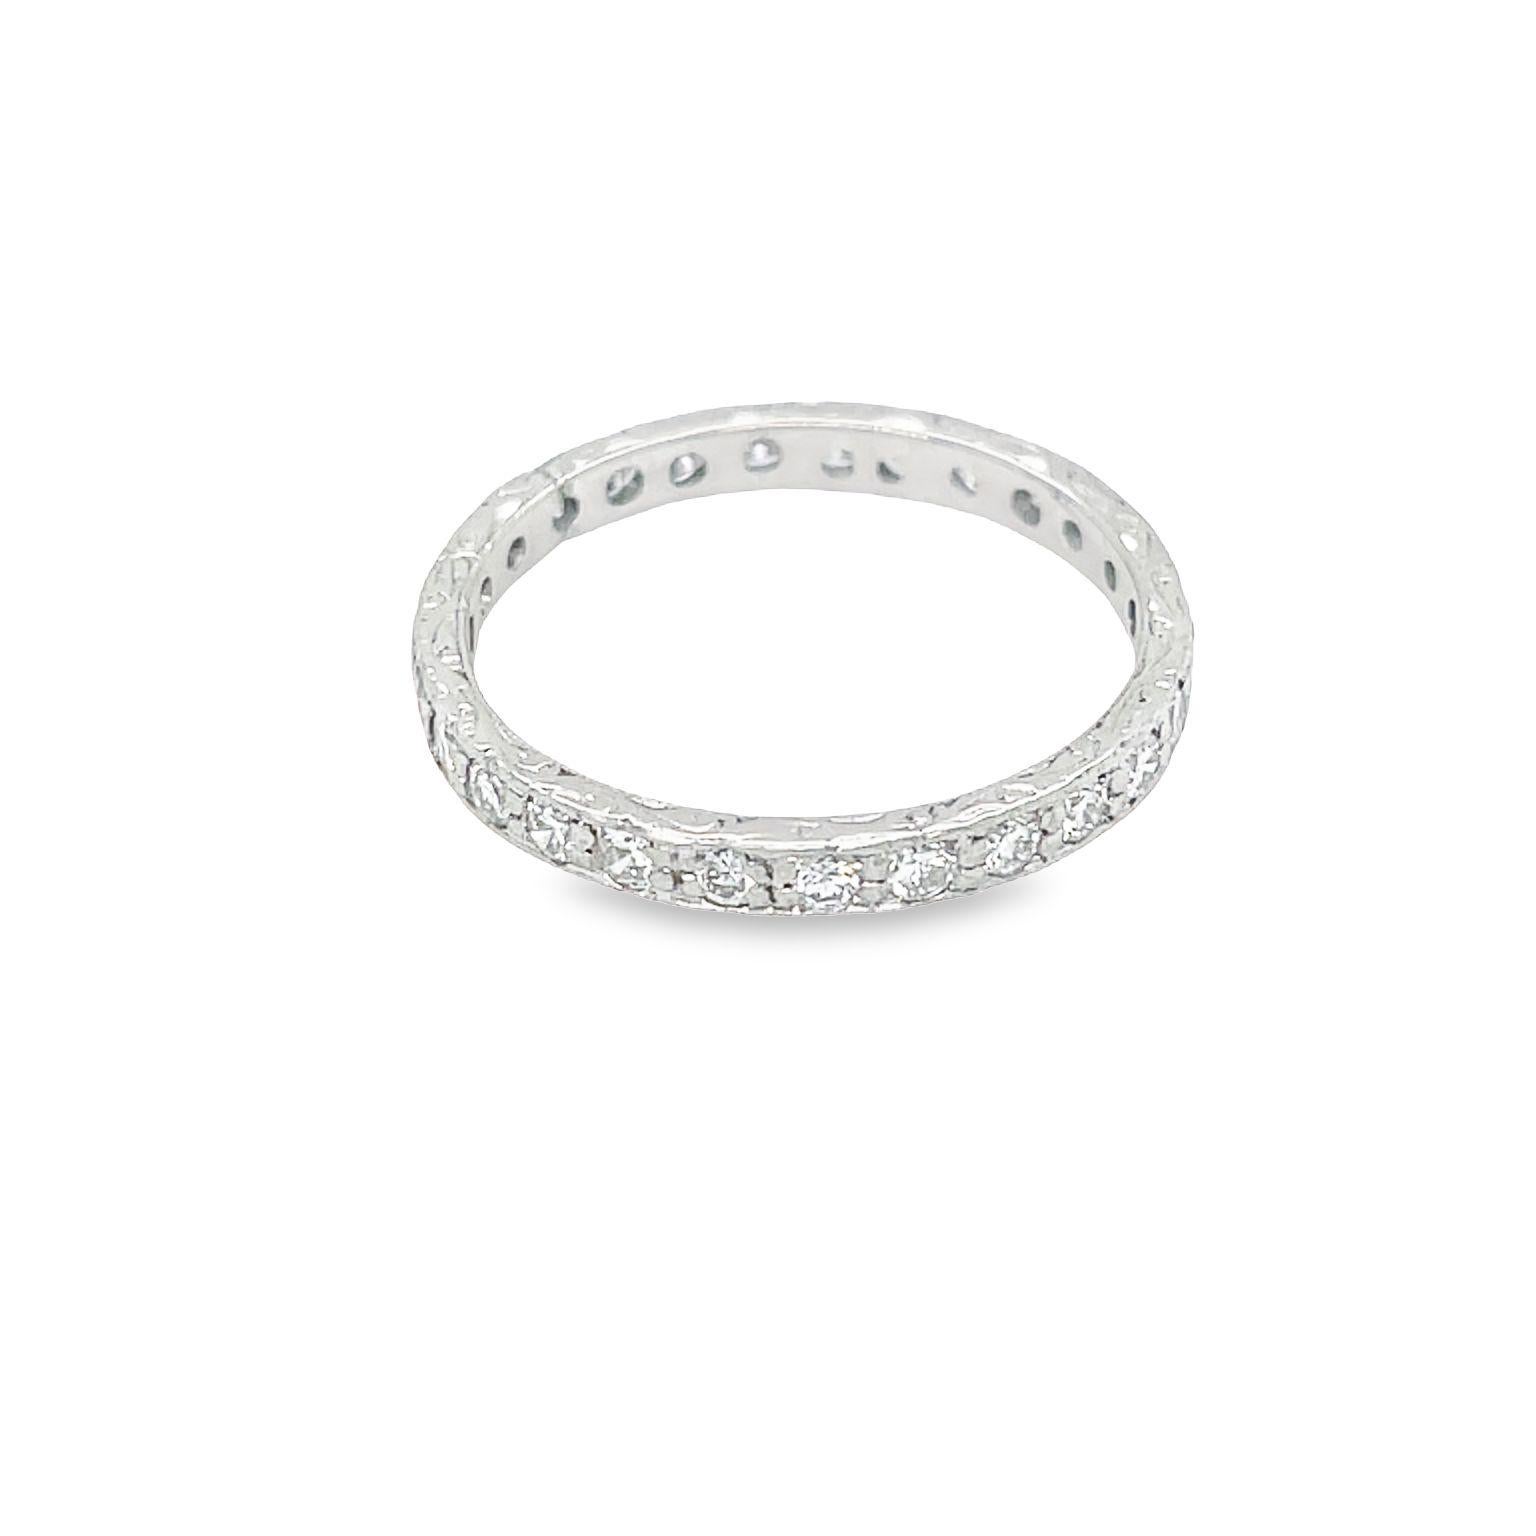 This is a beautiful and classic art deco design band made of handcrafted platinum. It features 27 round cut diamonds with a total weight of 1.35 carat. The diamonds are graded F-G color and VS-SI clarity. The band is adorned with intricate hand